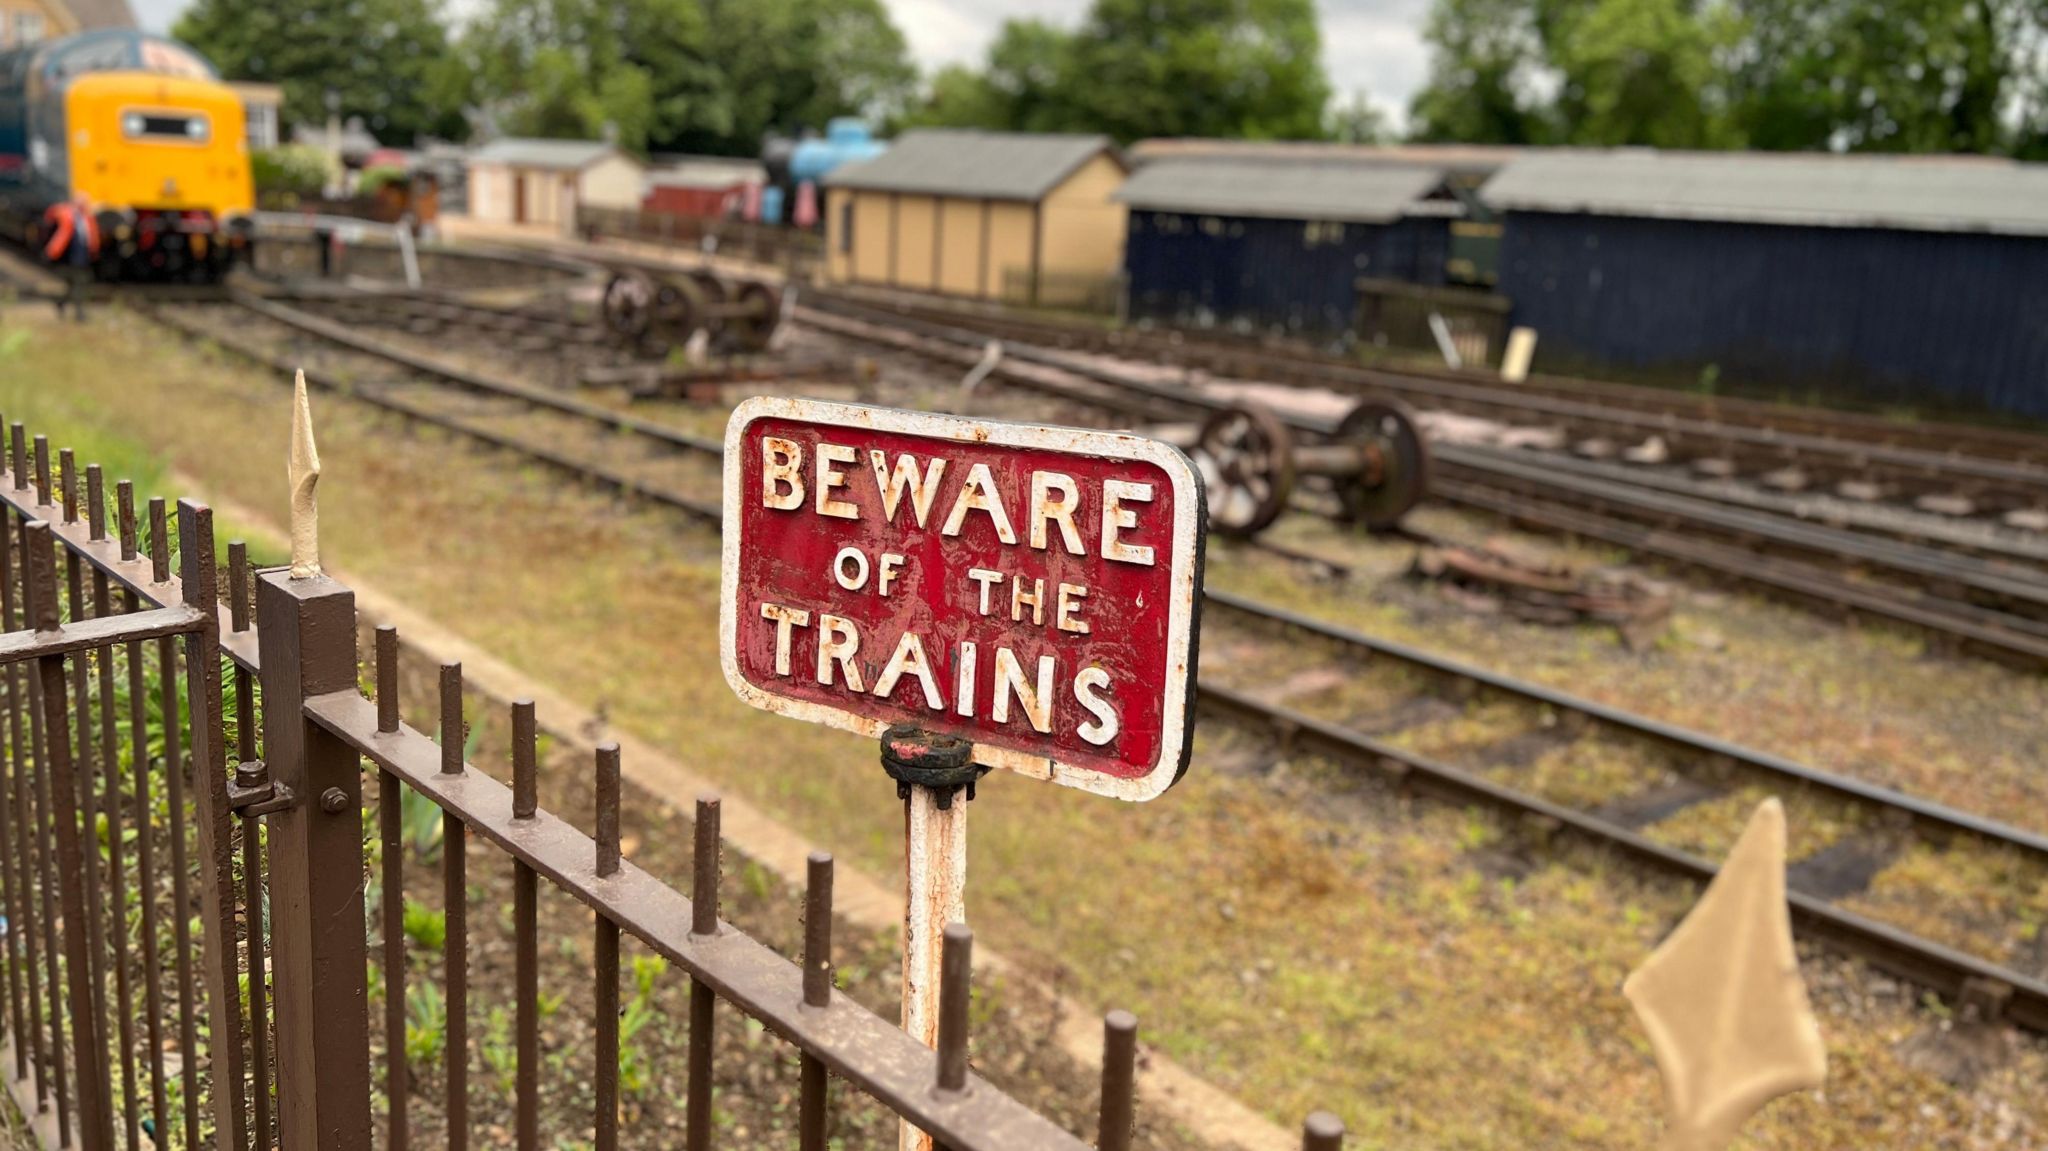 Beware the trains sign beside railway track